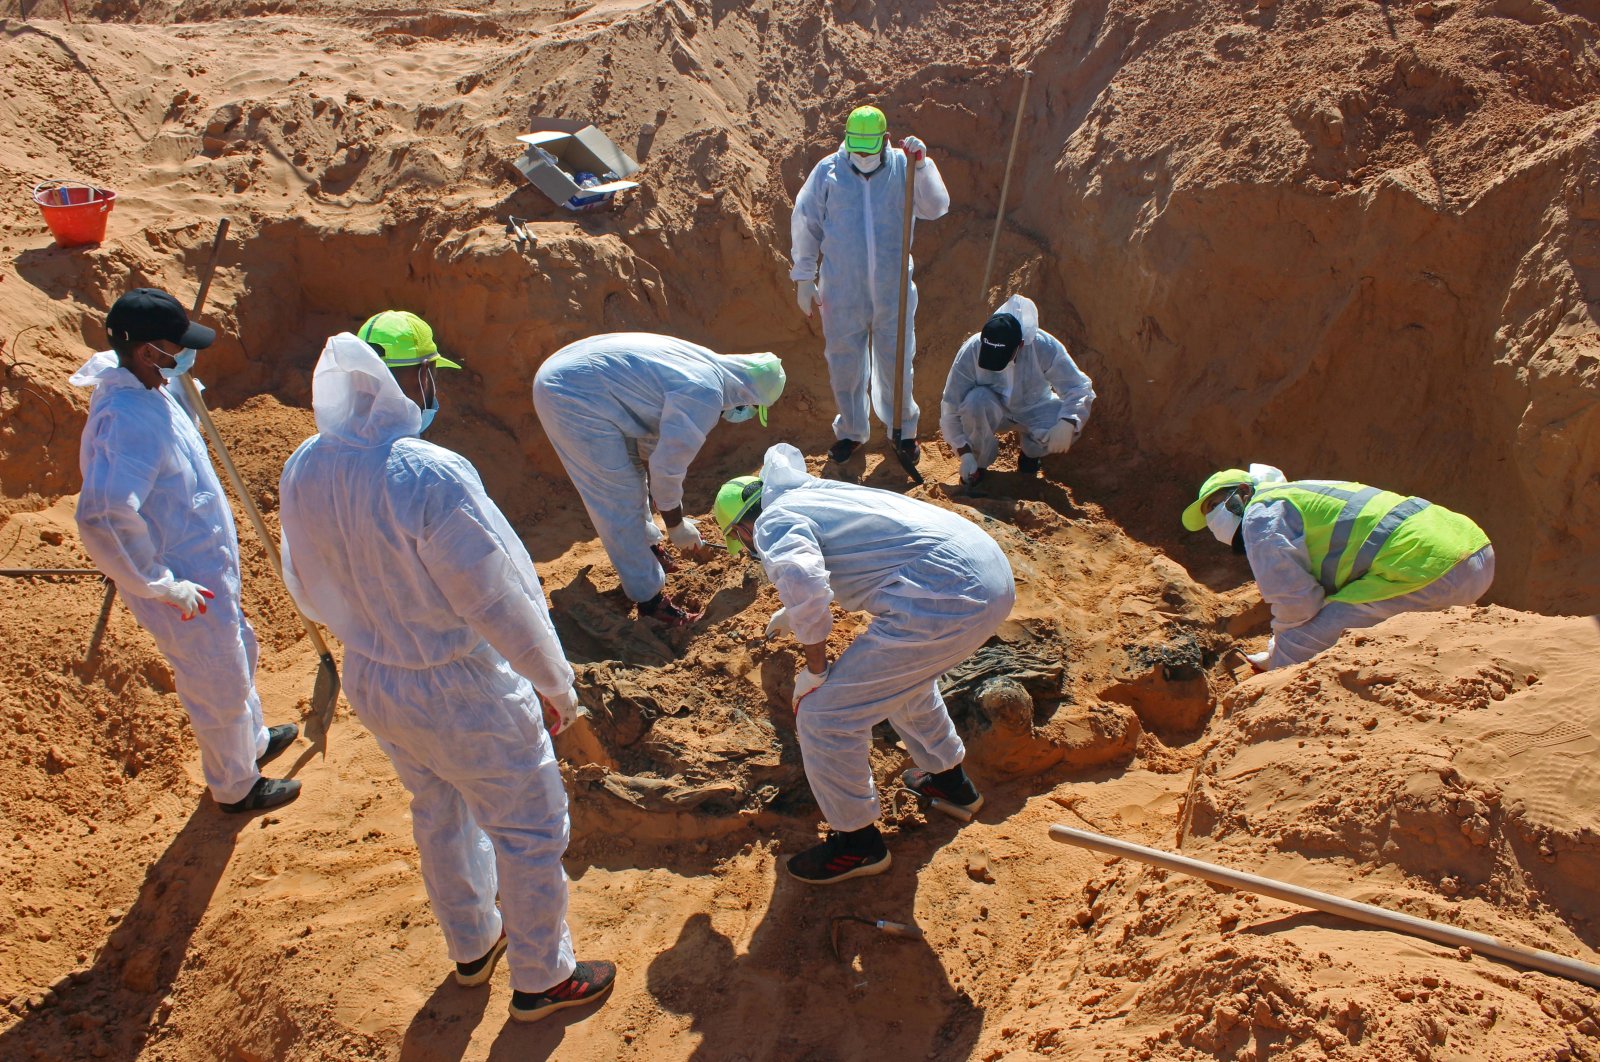  Members of the Government of National Accord&#039;s (GNA&#039;s) missing persons bureau exhume bodies in what Libya&#039;s internationally recognized government officials say is a mass grave, in Tarhuna city, Libya Oct. 27, 2020. (Reuters File Photo)